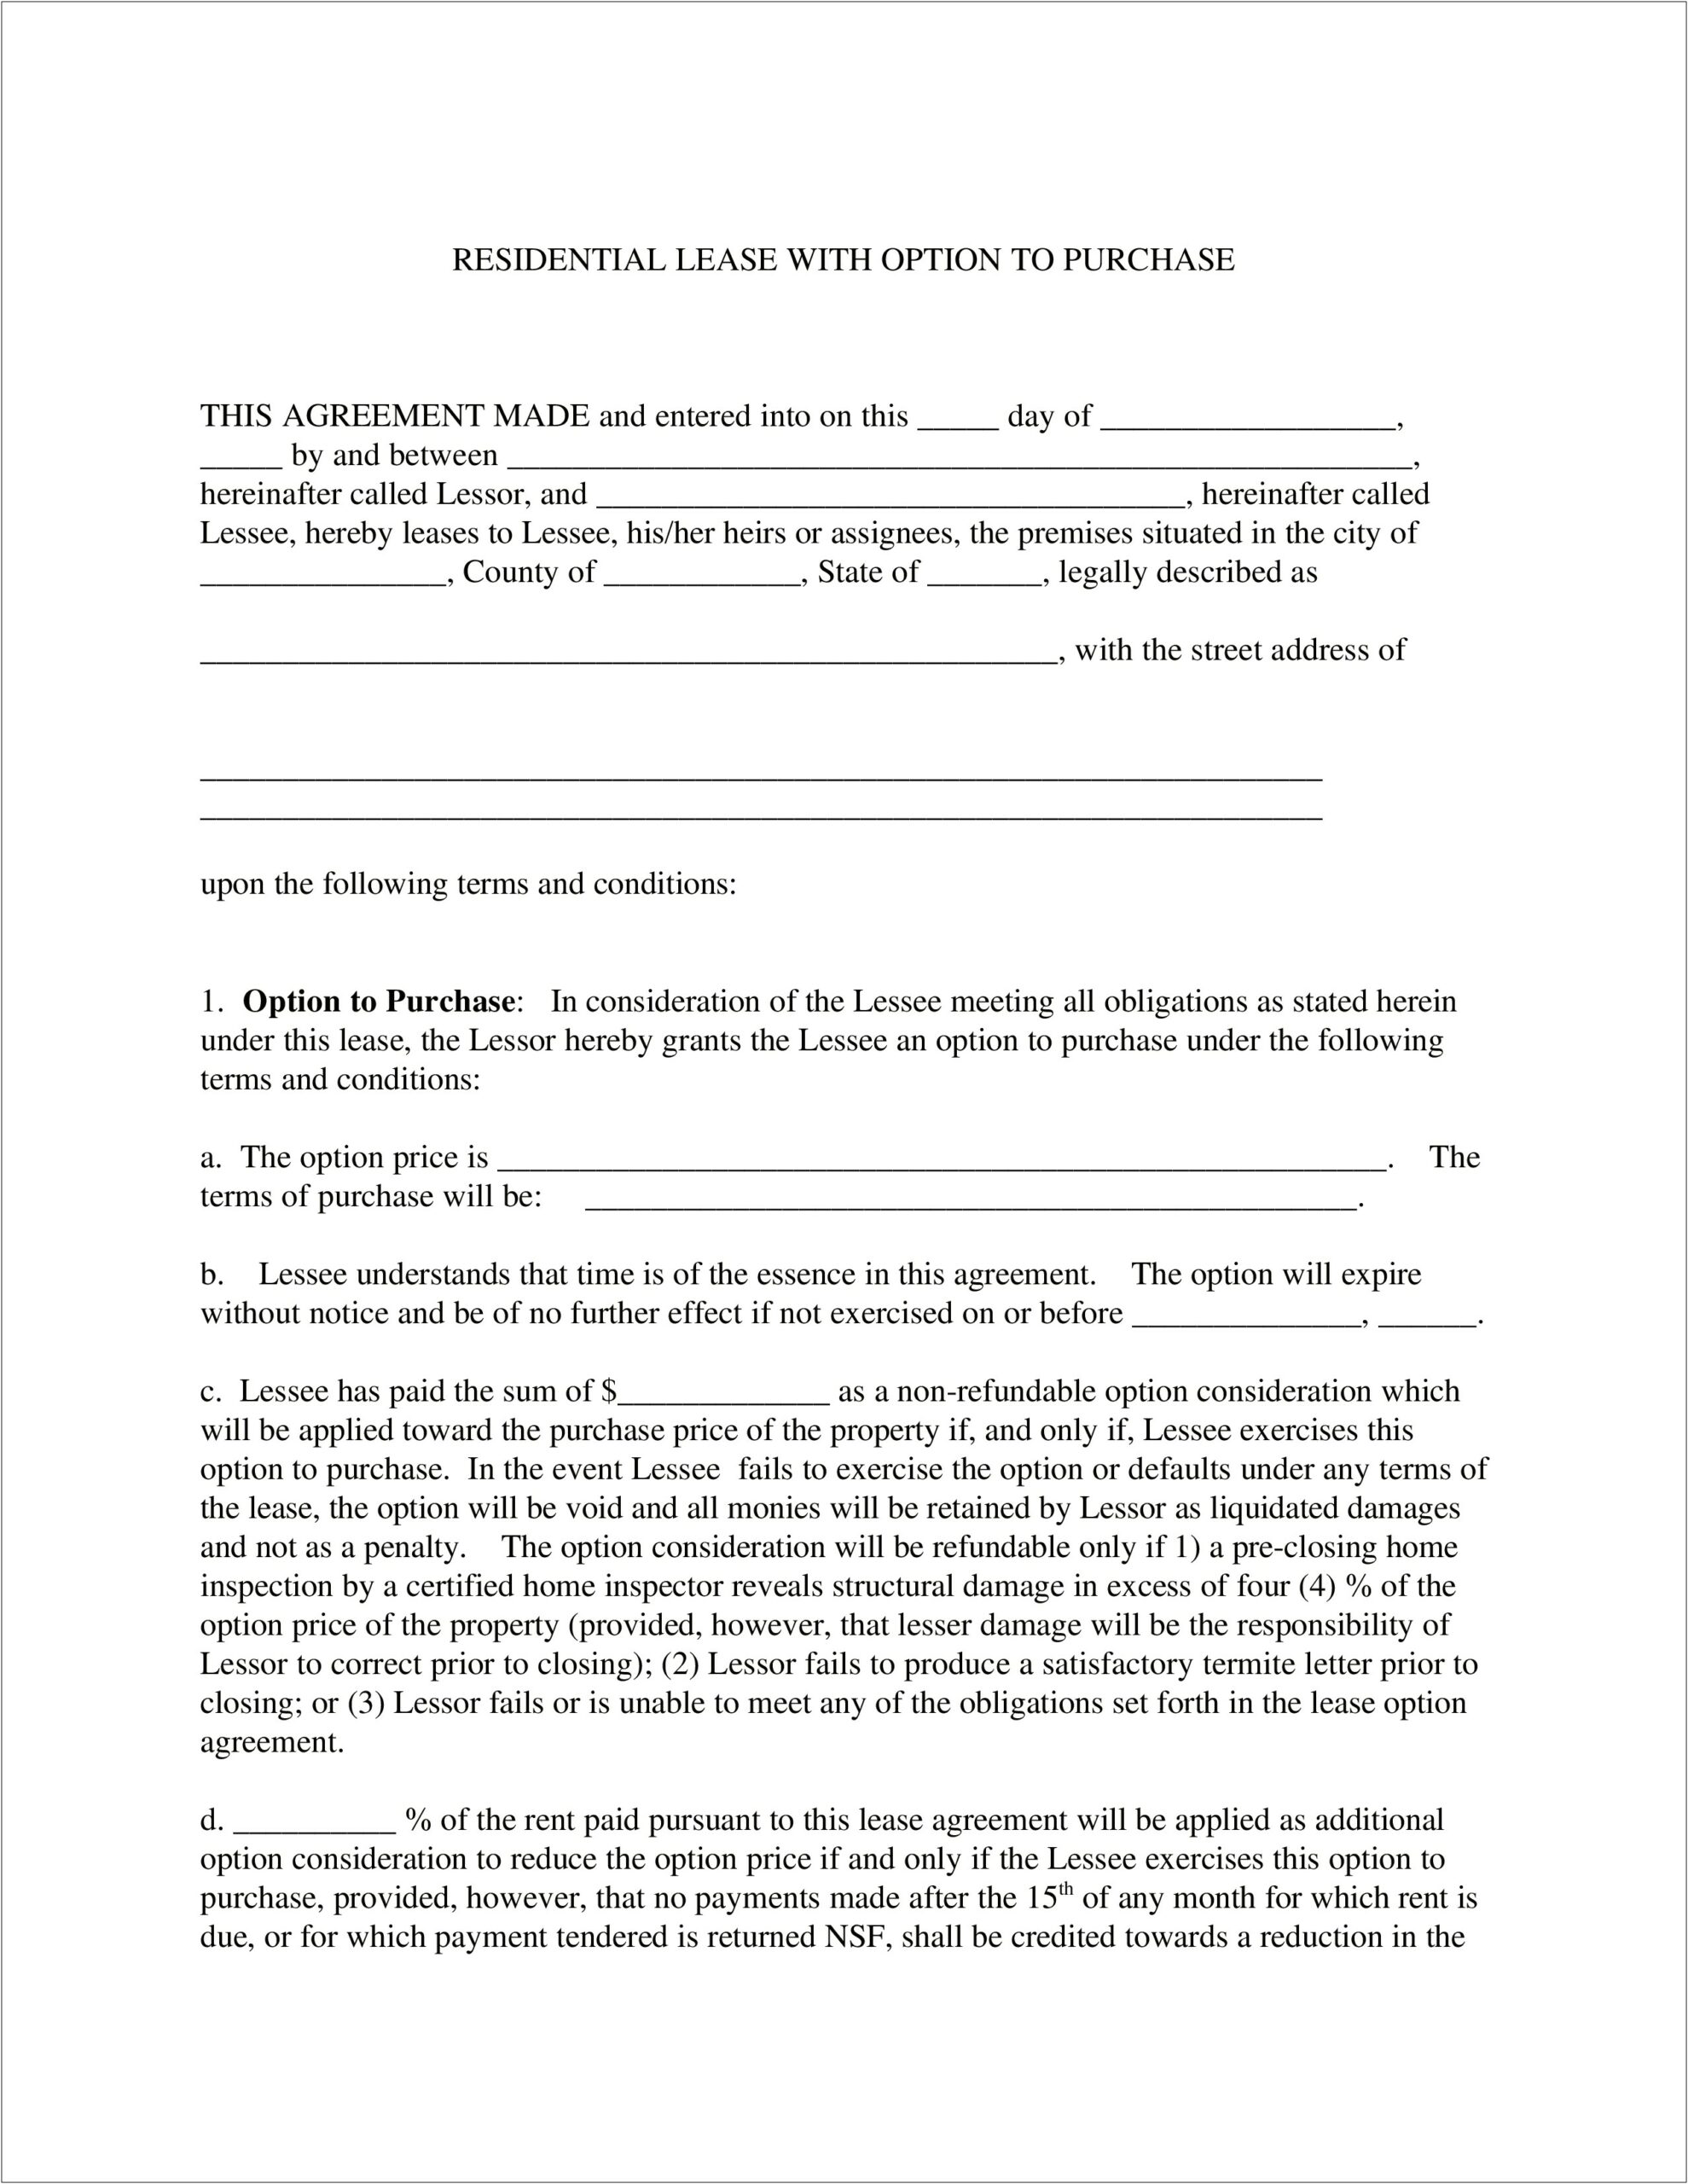 Free Rent To Own Home Contract Template